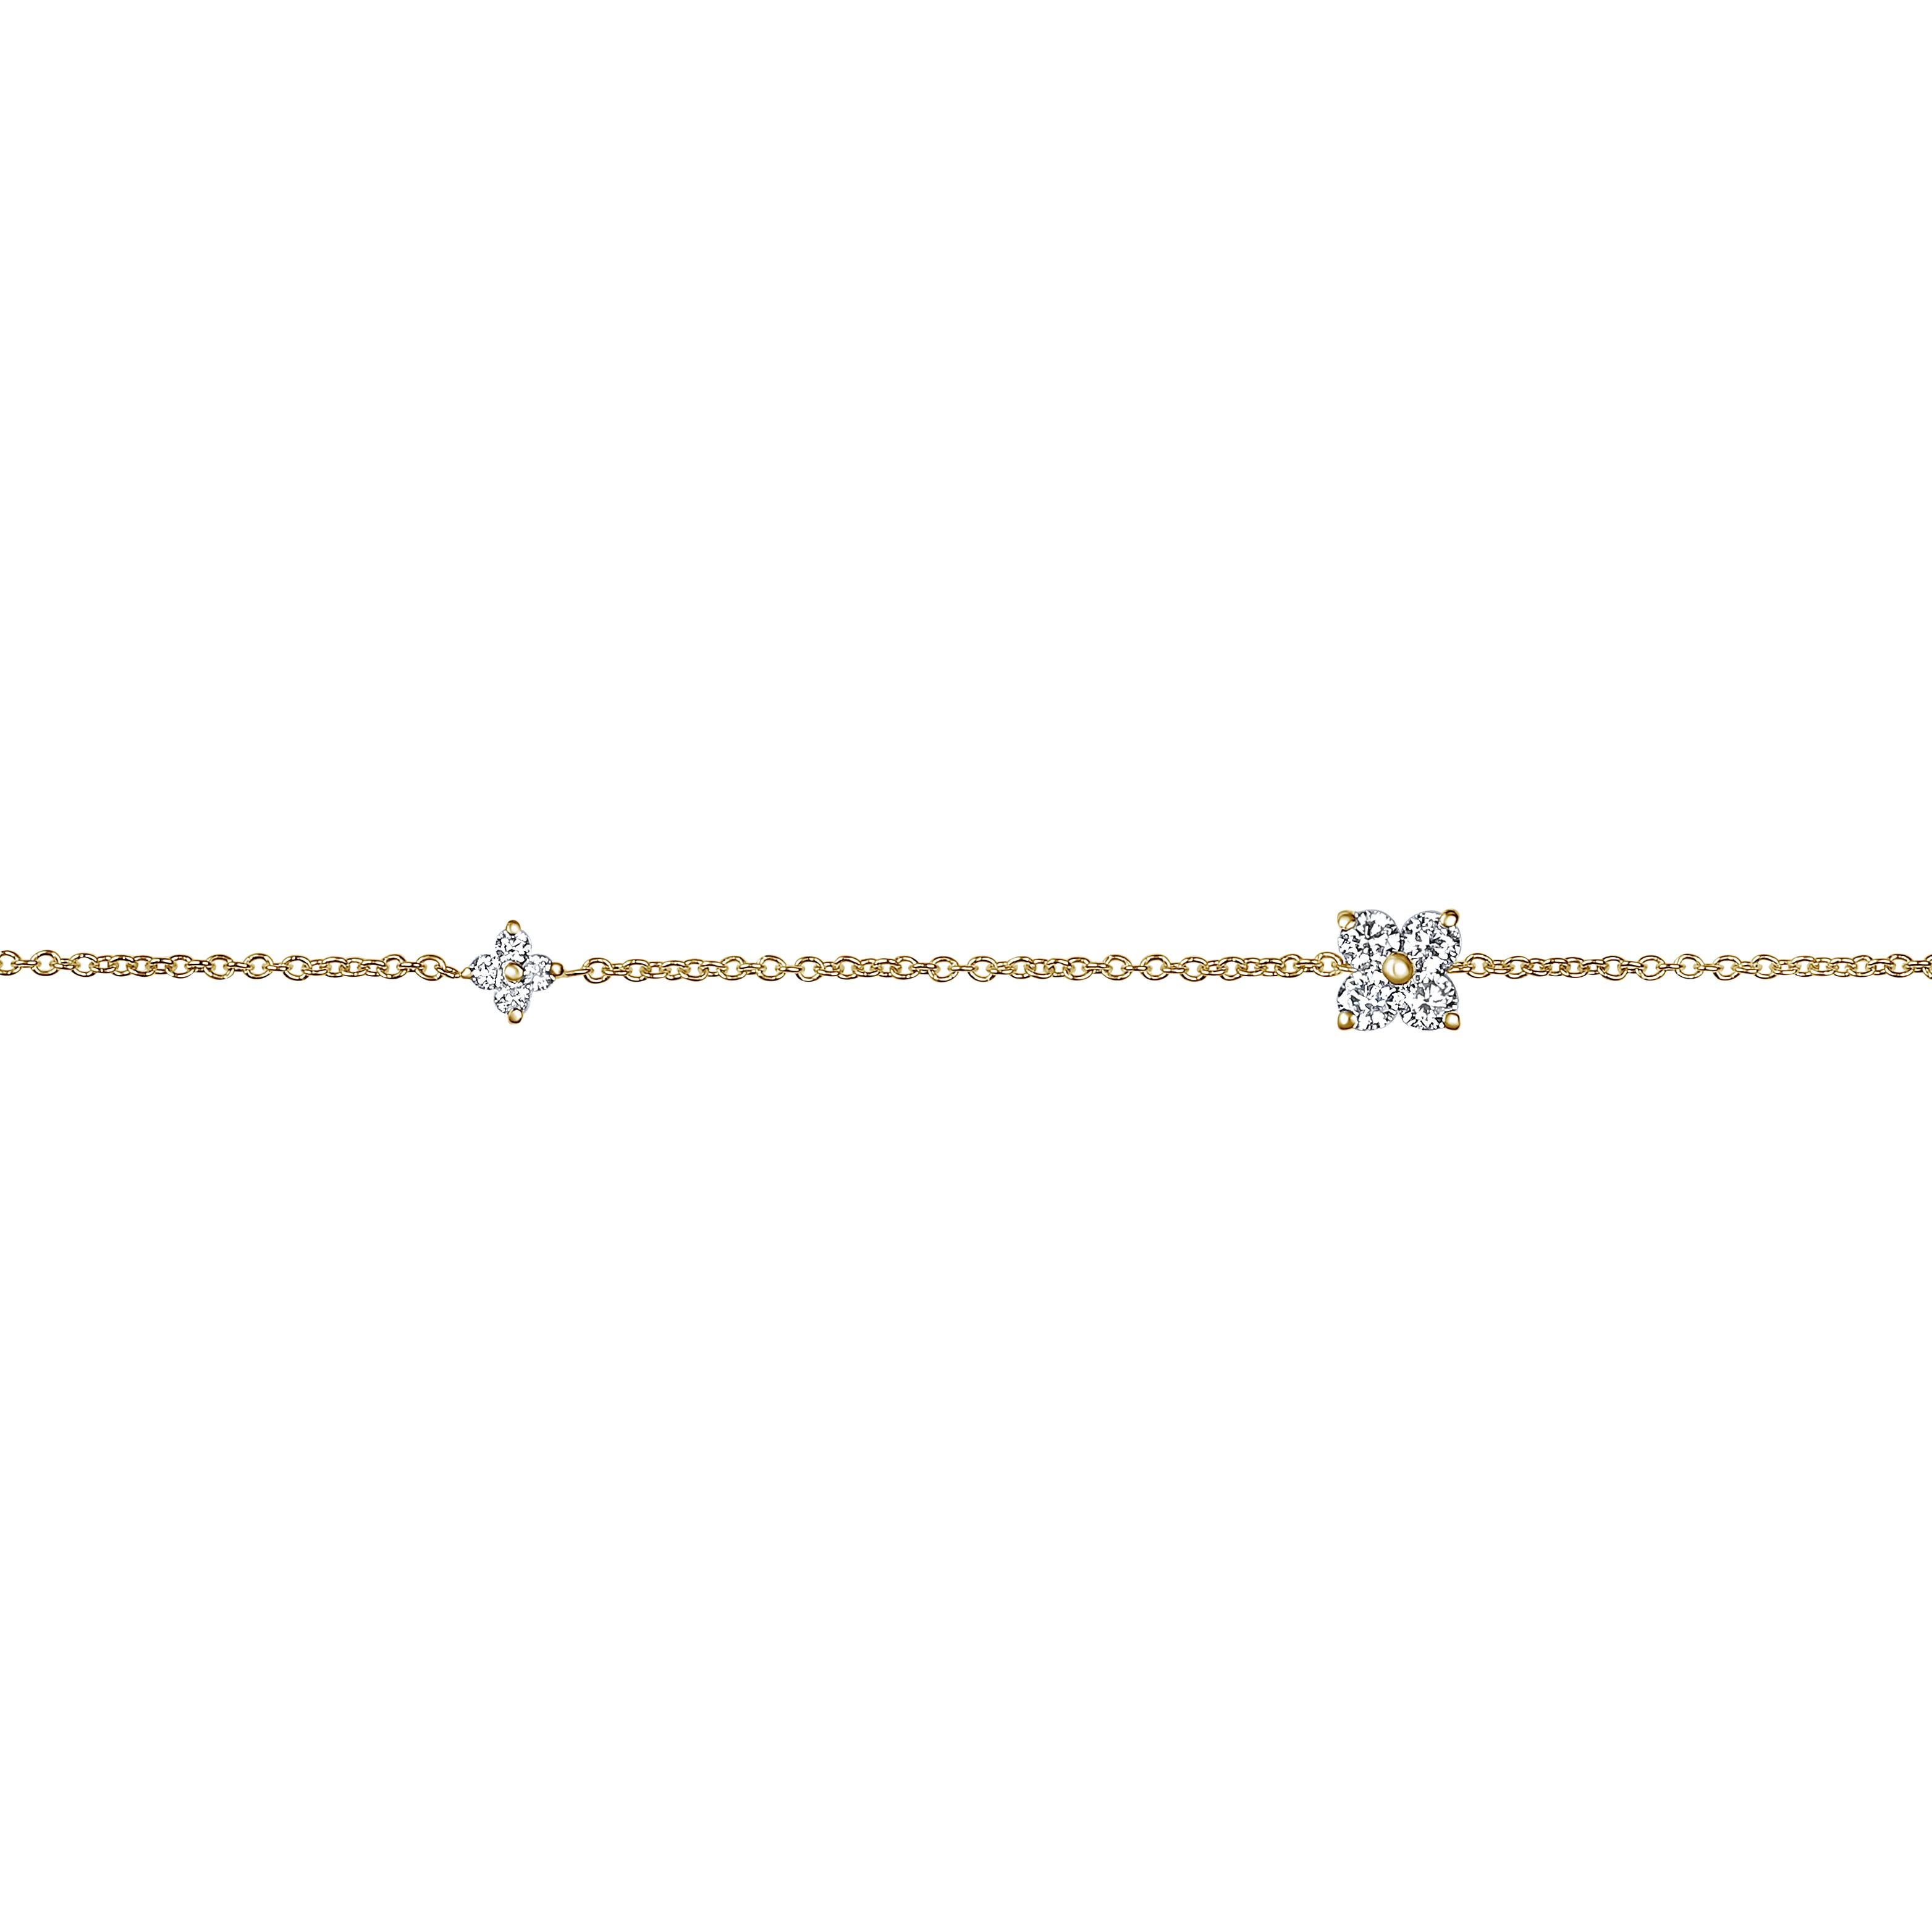 0.24 Carat Diamond Flower Petal Bracelet in 14 Karat Yellow Gold, Shlomit Rogel

Beautiful sparkle meets a wonderfully elegant design in this dainty chain bracelet. Crafted from 14k solid yellow gold, the bracelet features a diamond flower at the